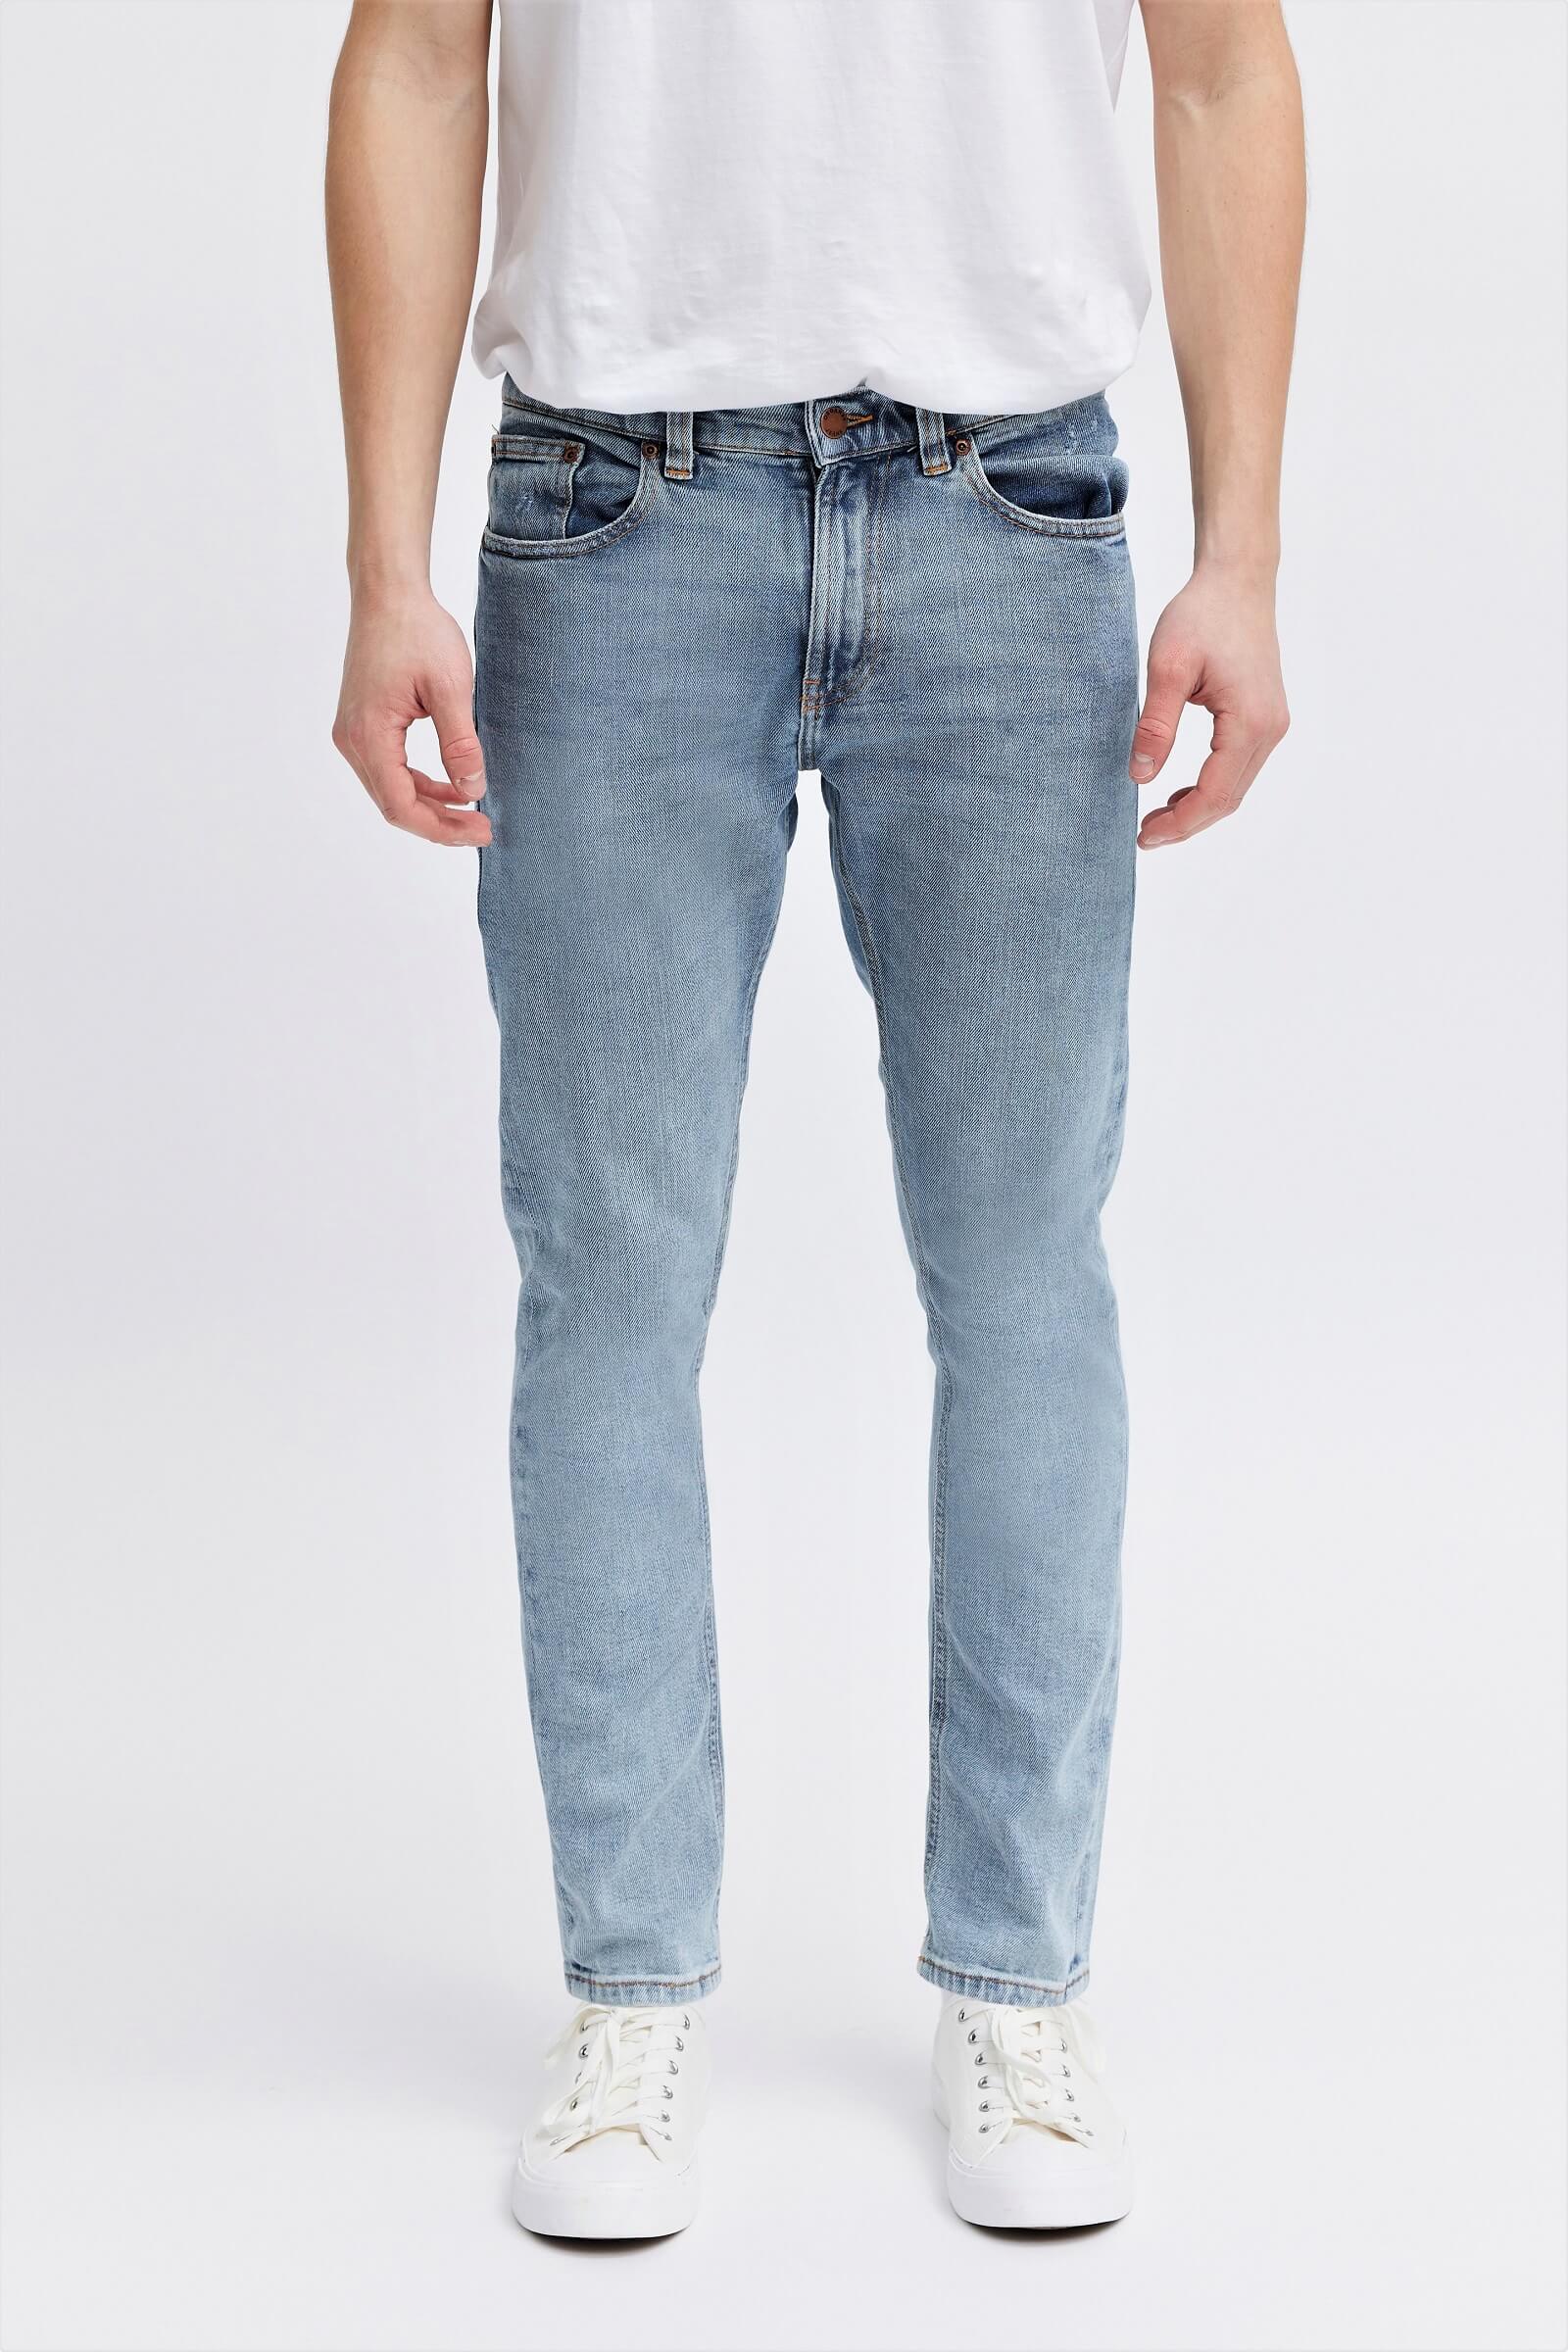 O2 Jeans™, Organic, Men's Slim Tapered Fit